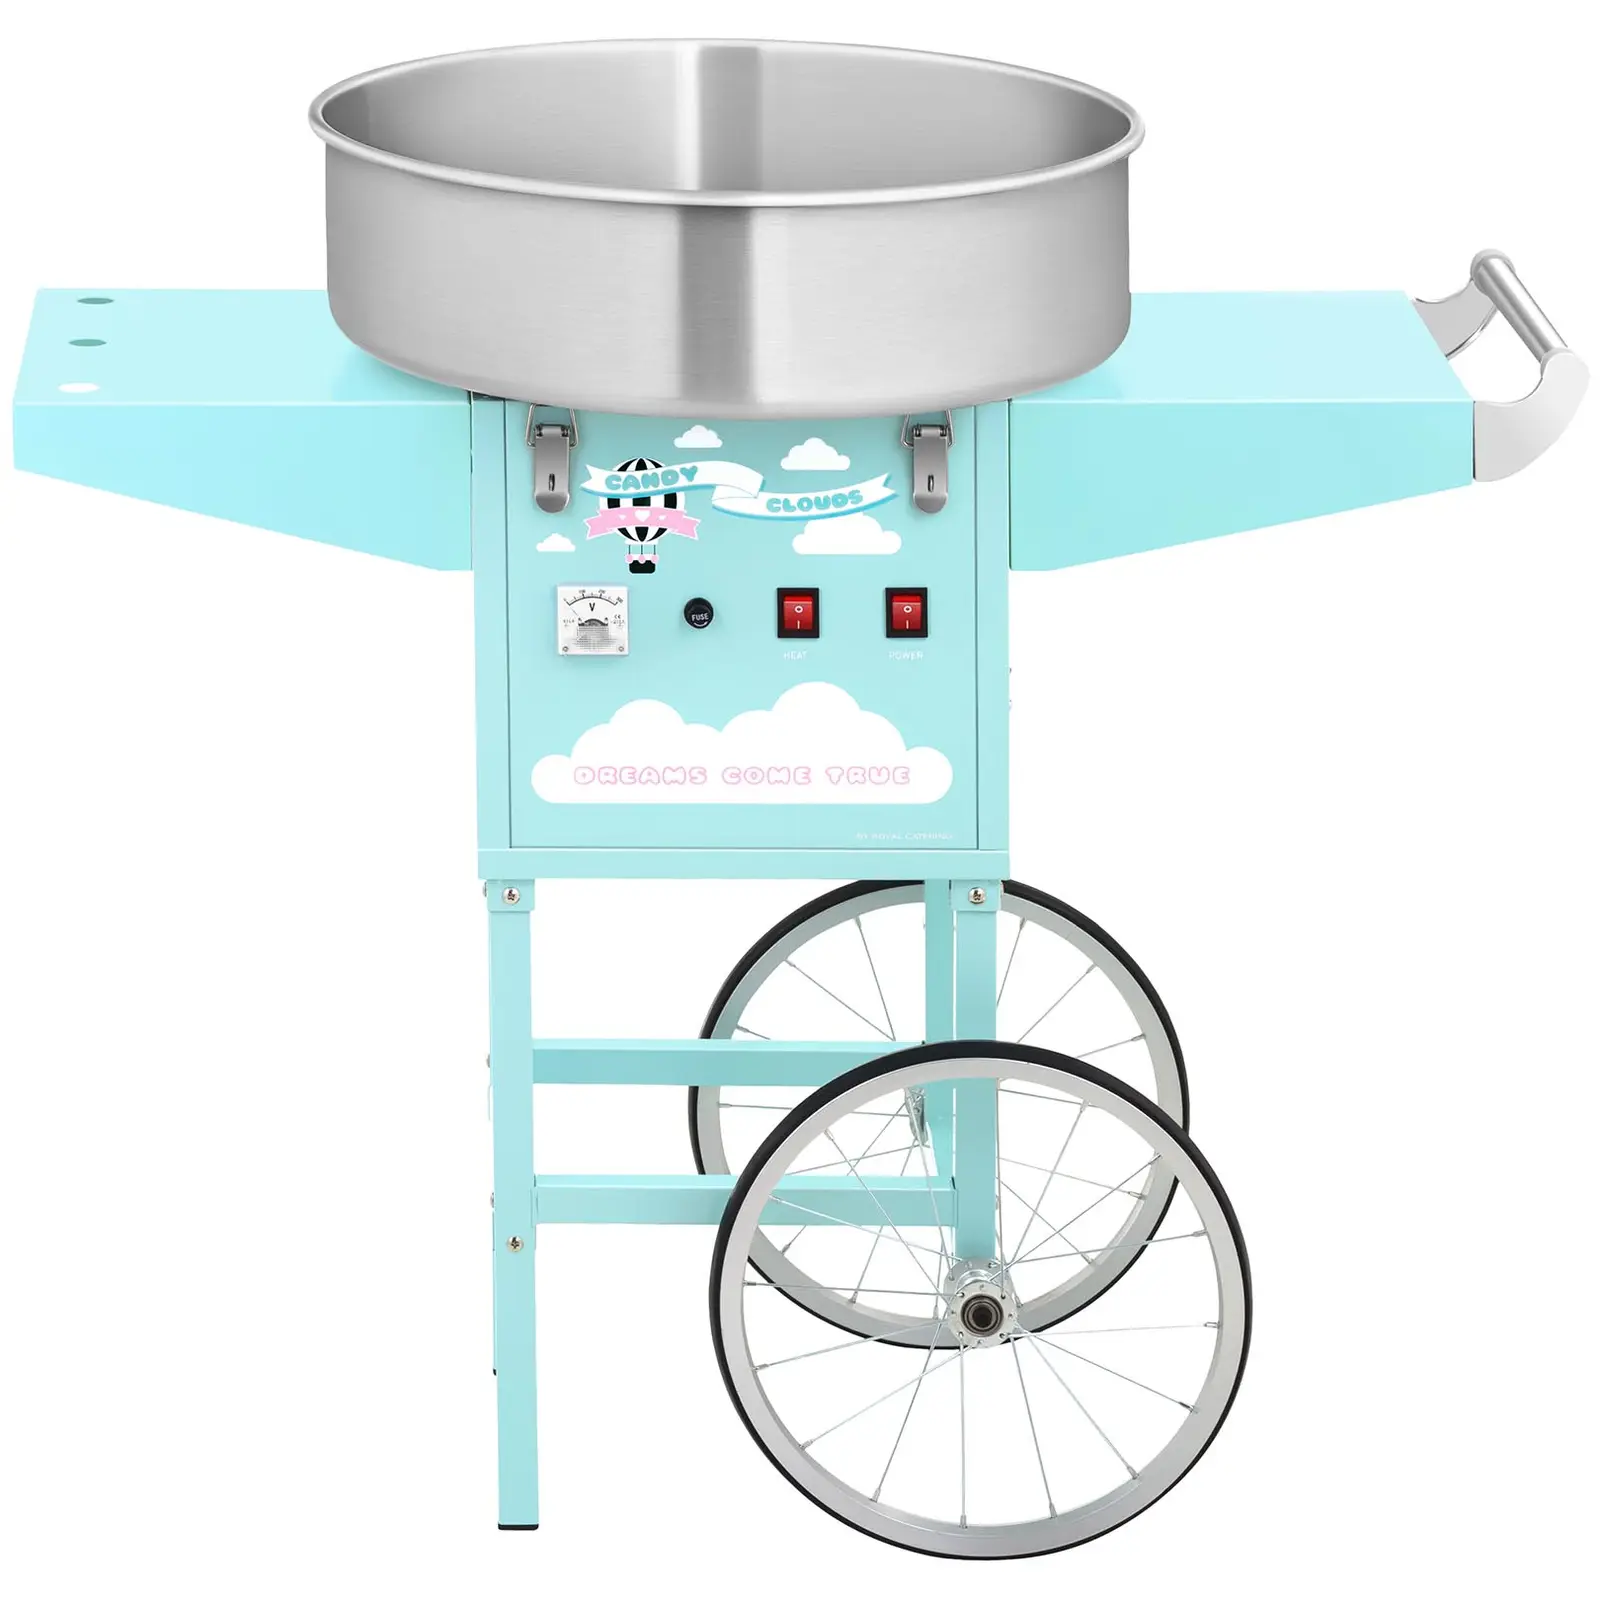 Candy Floss Machine Set with LED Cotton Candy Sticks and Cart - 52 cm - 1,200 watts - turquoise